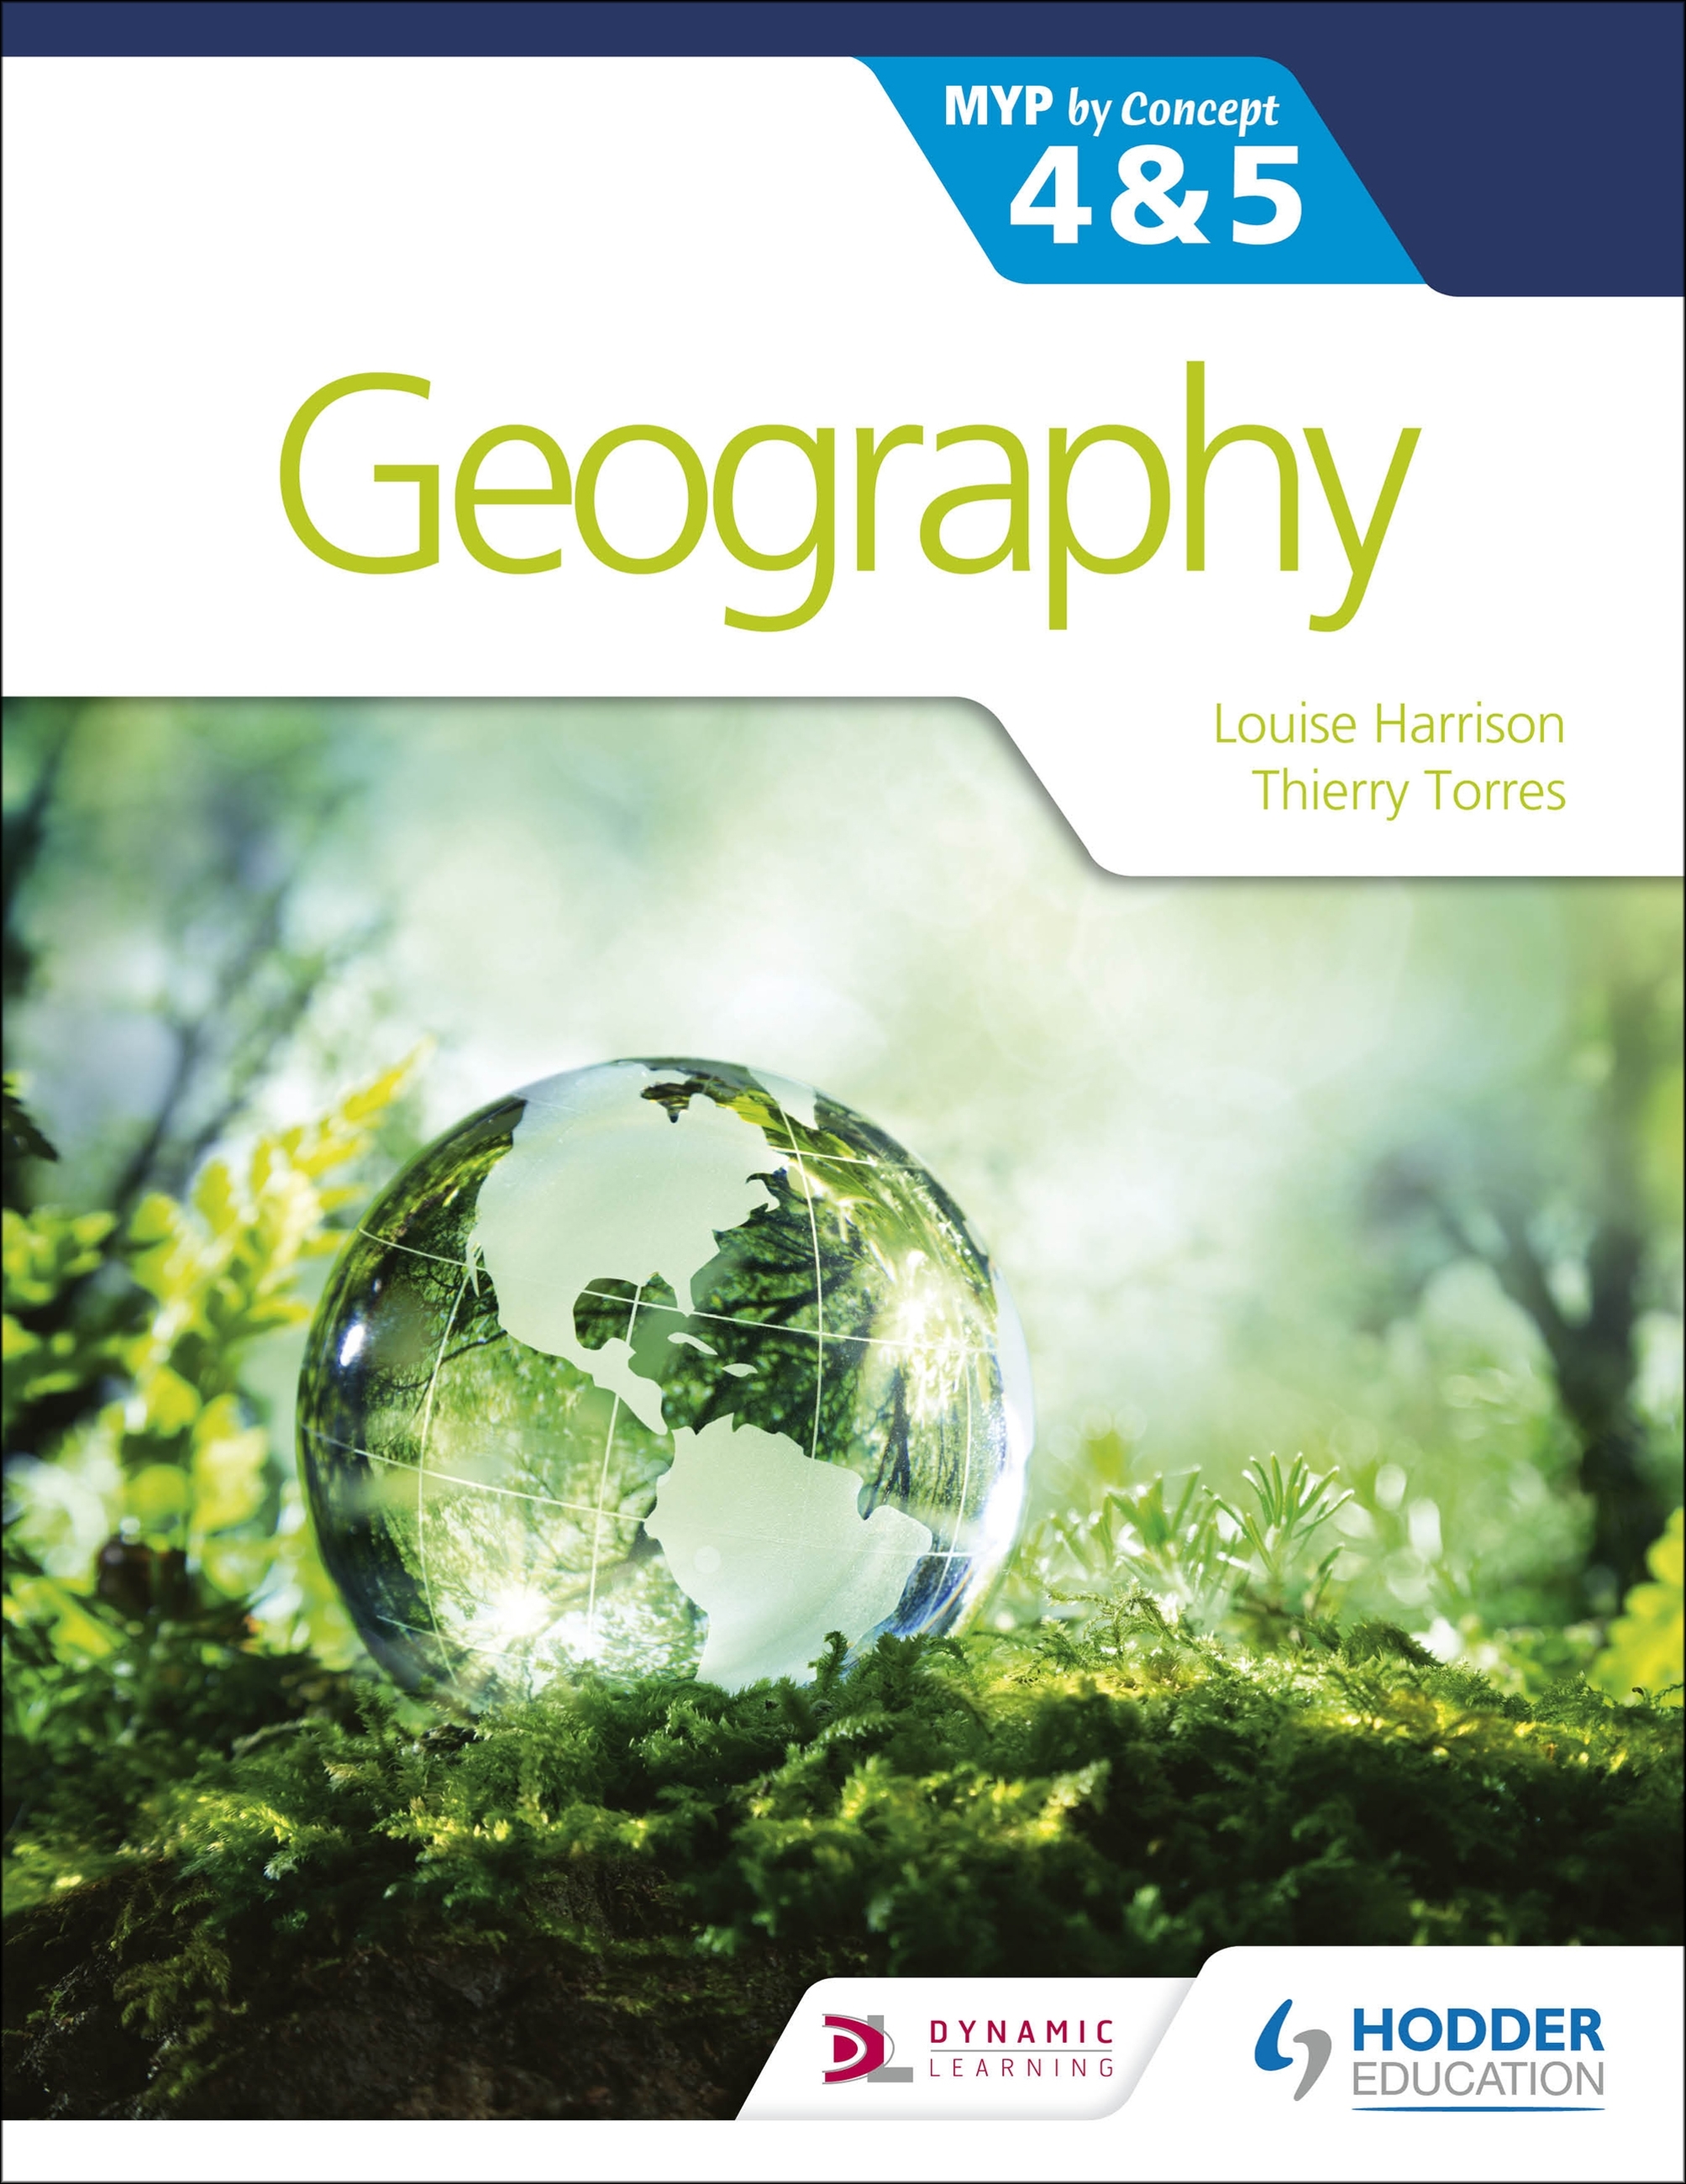 hodder education workbook answers geography